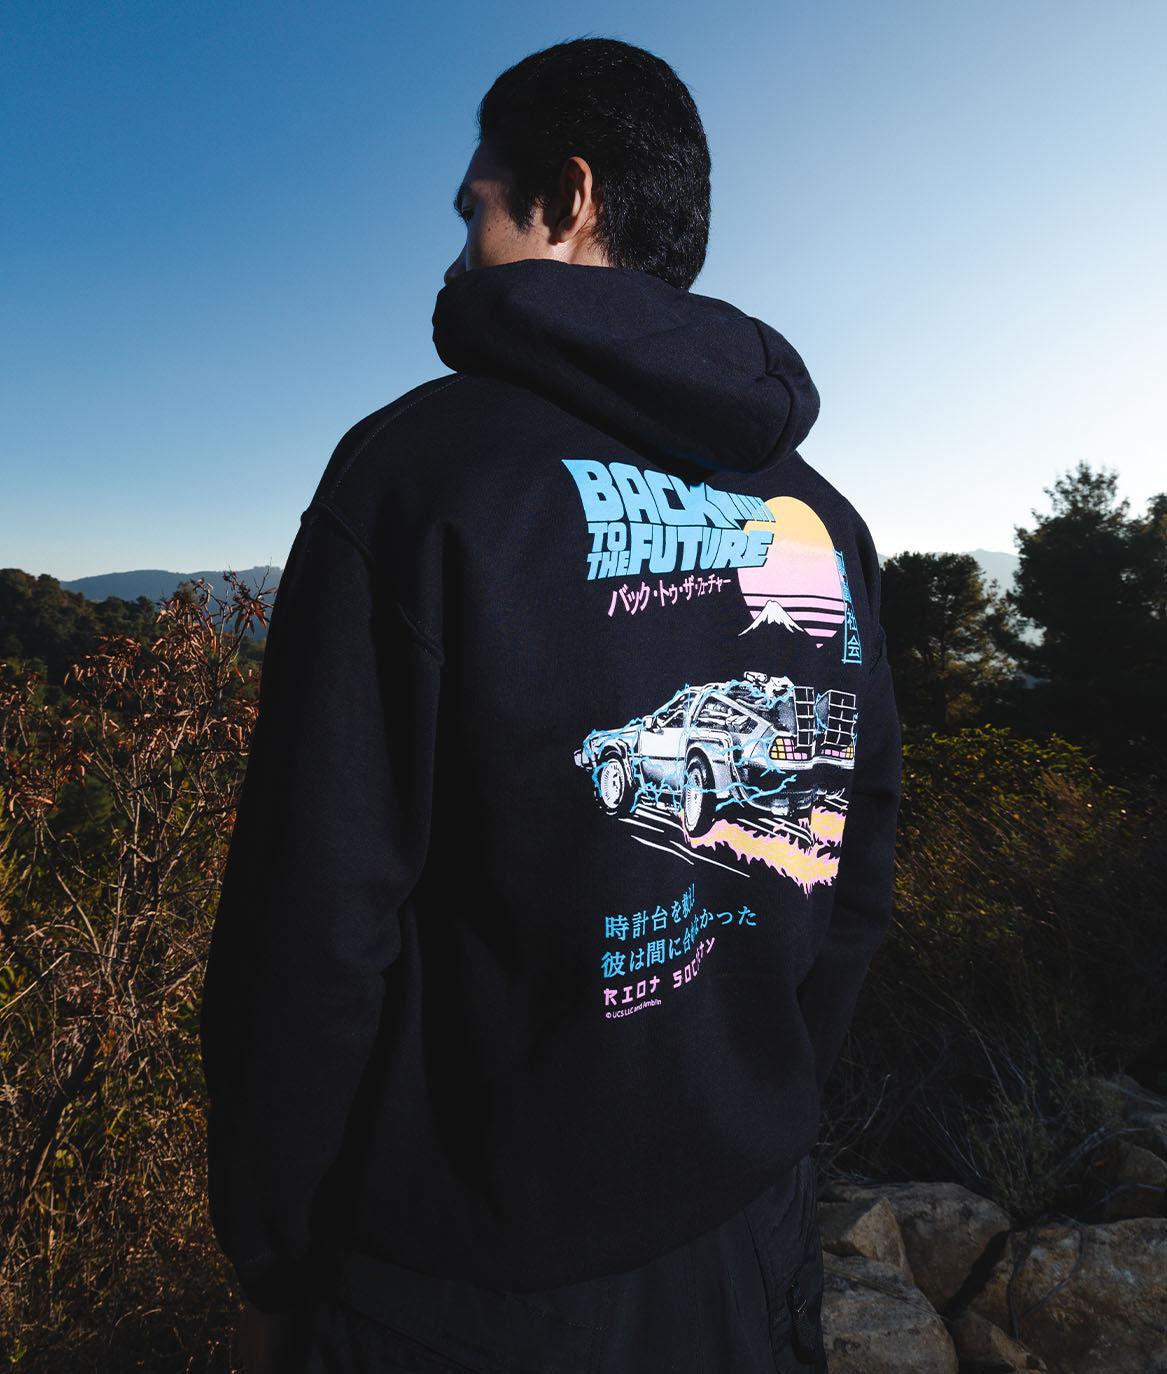 Back to the Future Apparel, Official Gear,Back to the Future Merch